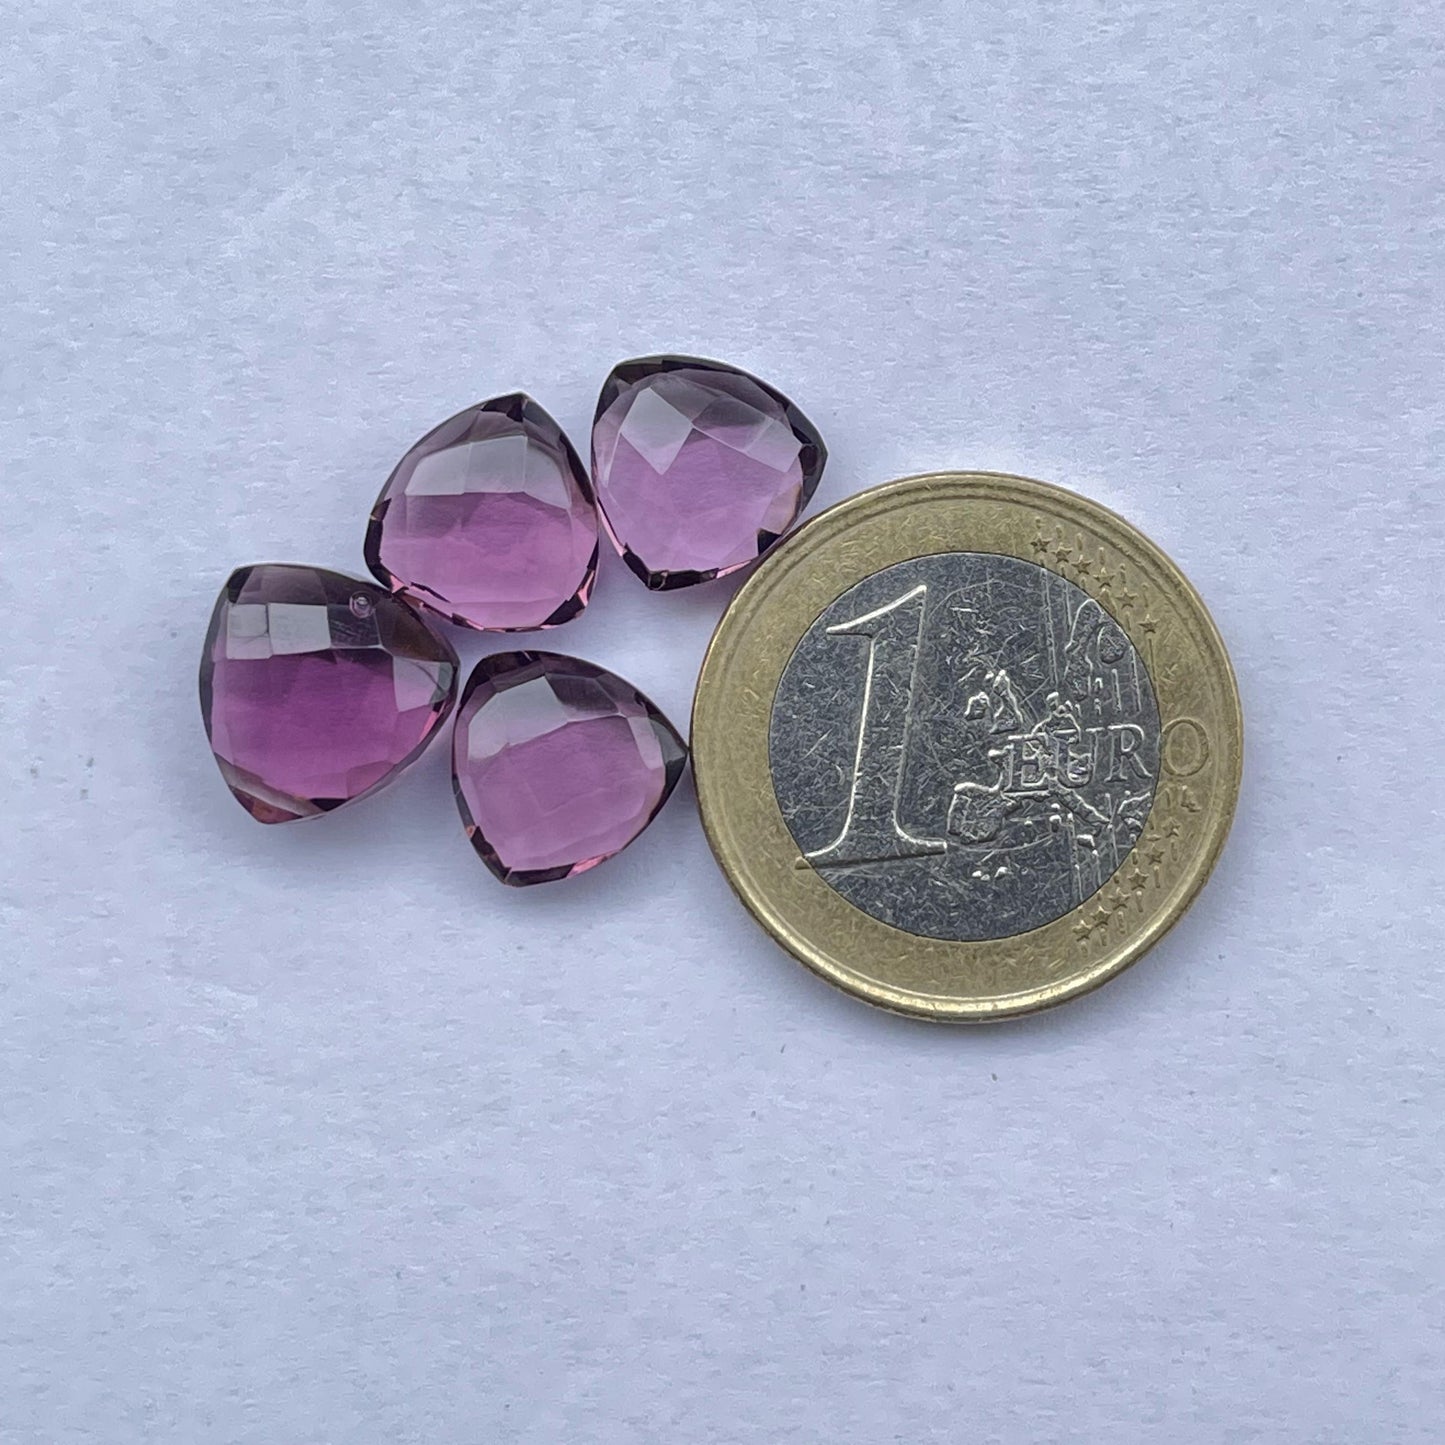 Amethyst Faceted Nice Quality (10 mm) Briolette